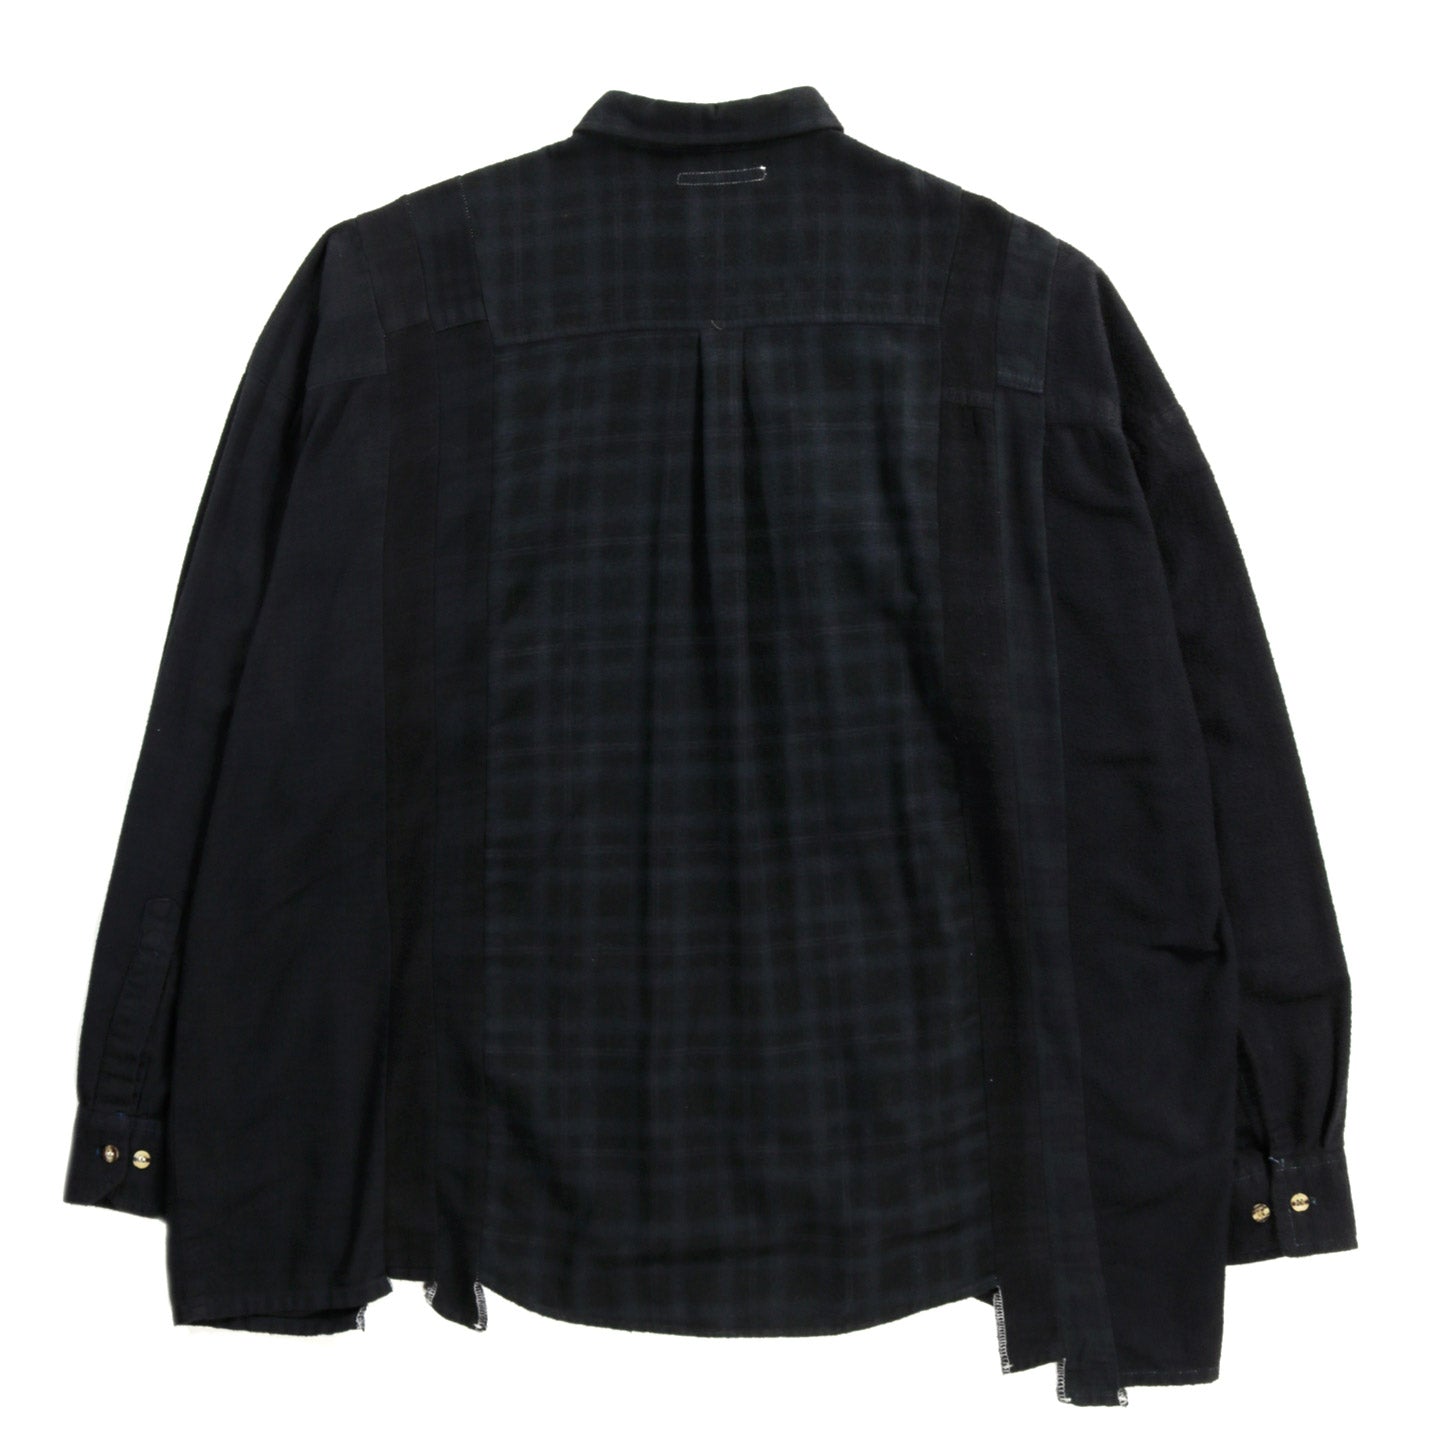 REBUILD BY NEEDLES FLANNEL SHIRT 7 CUTS WIDE OVER DYE BLACK - C 